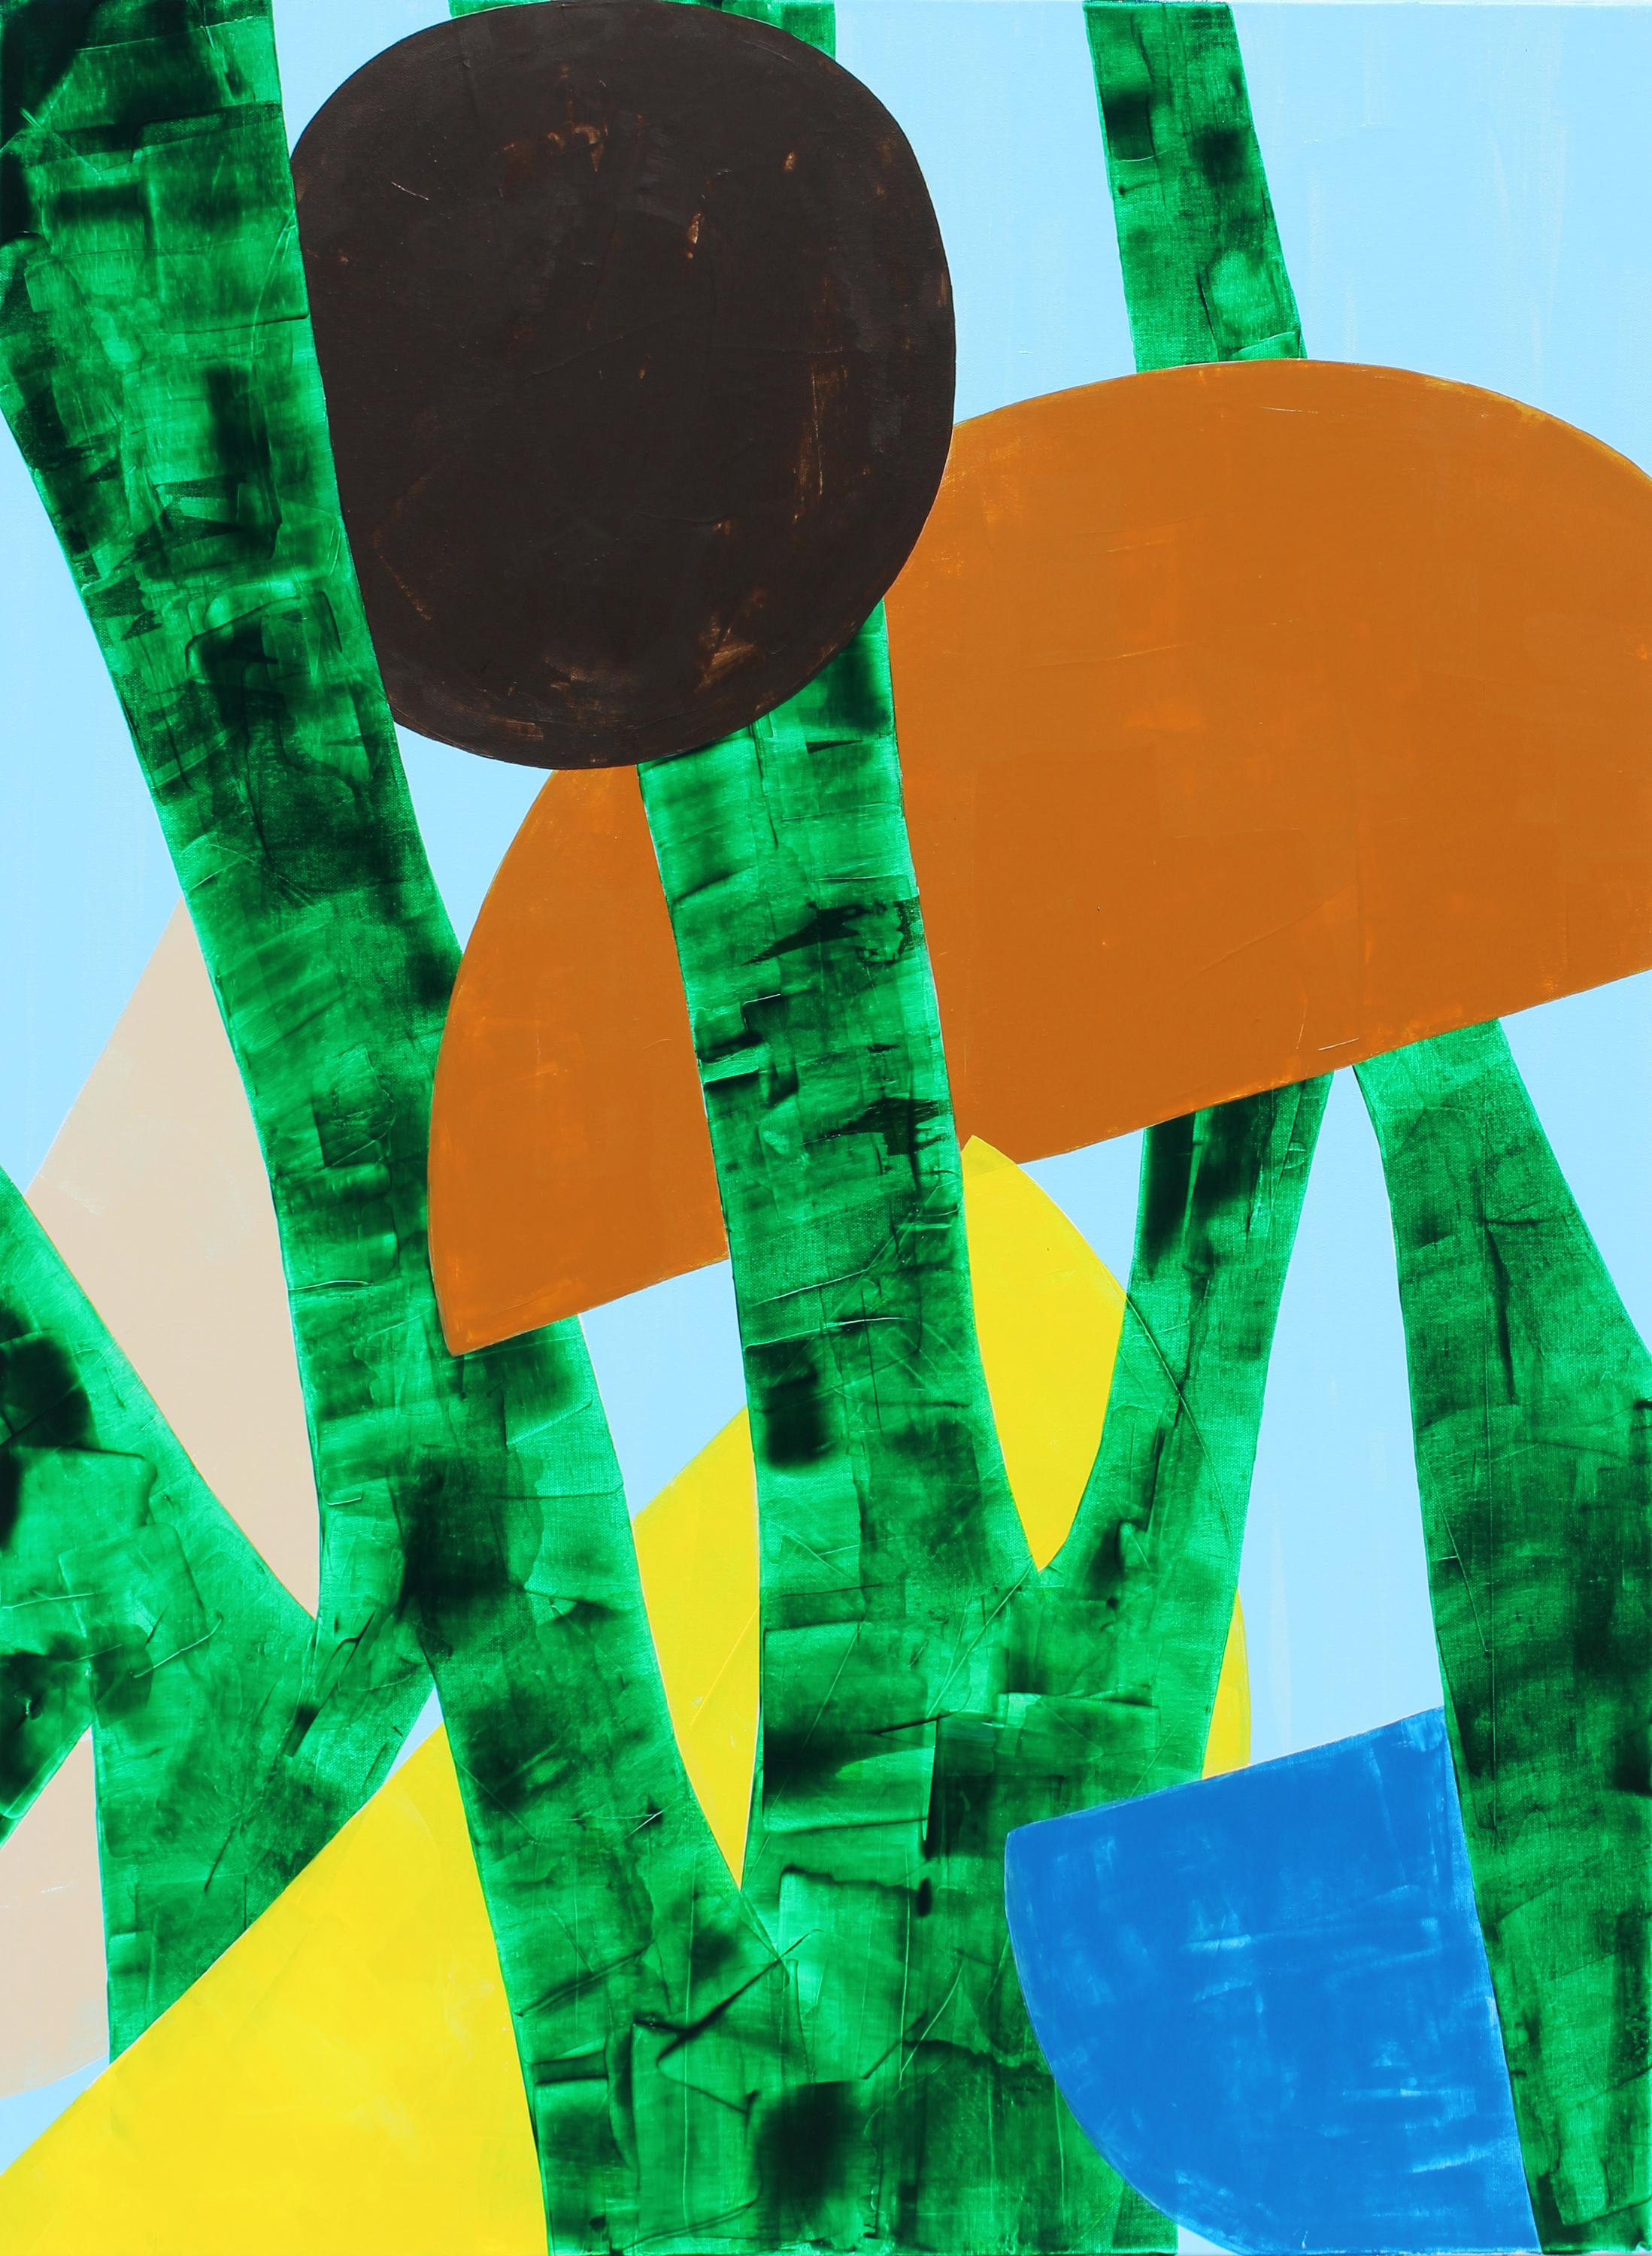 Laura Dargan Abstract Painting - "Lush" - Colorful Non-Objective Painting - Bold Shapes - Sonia Delaunay